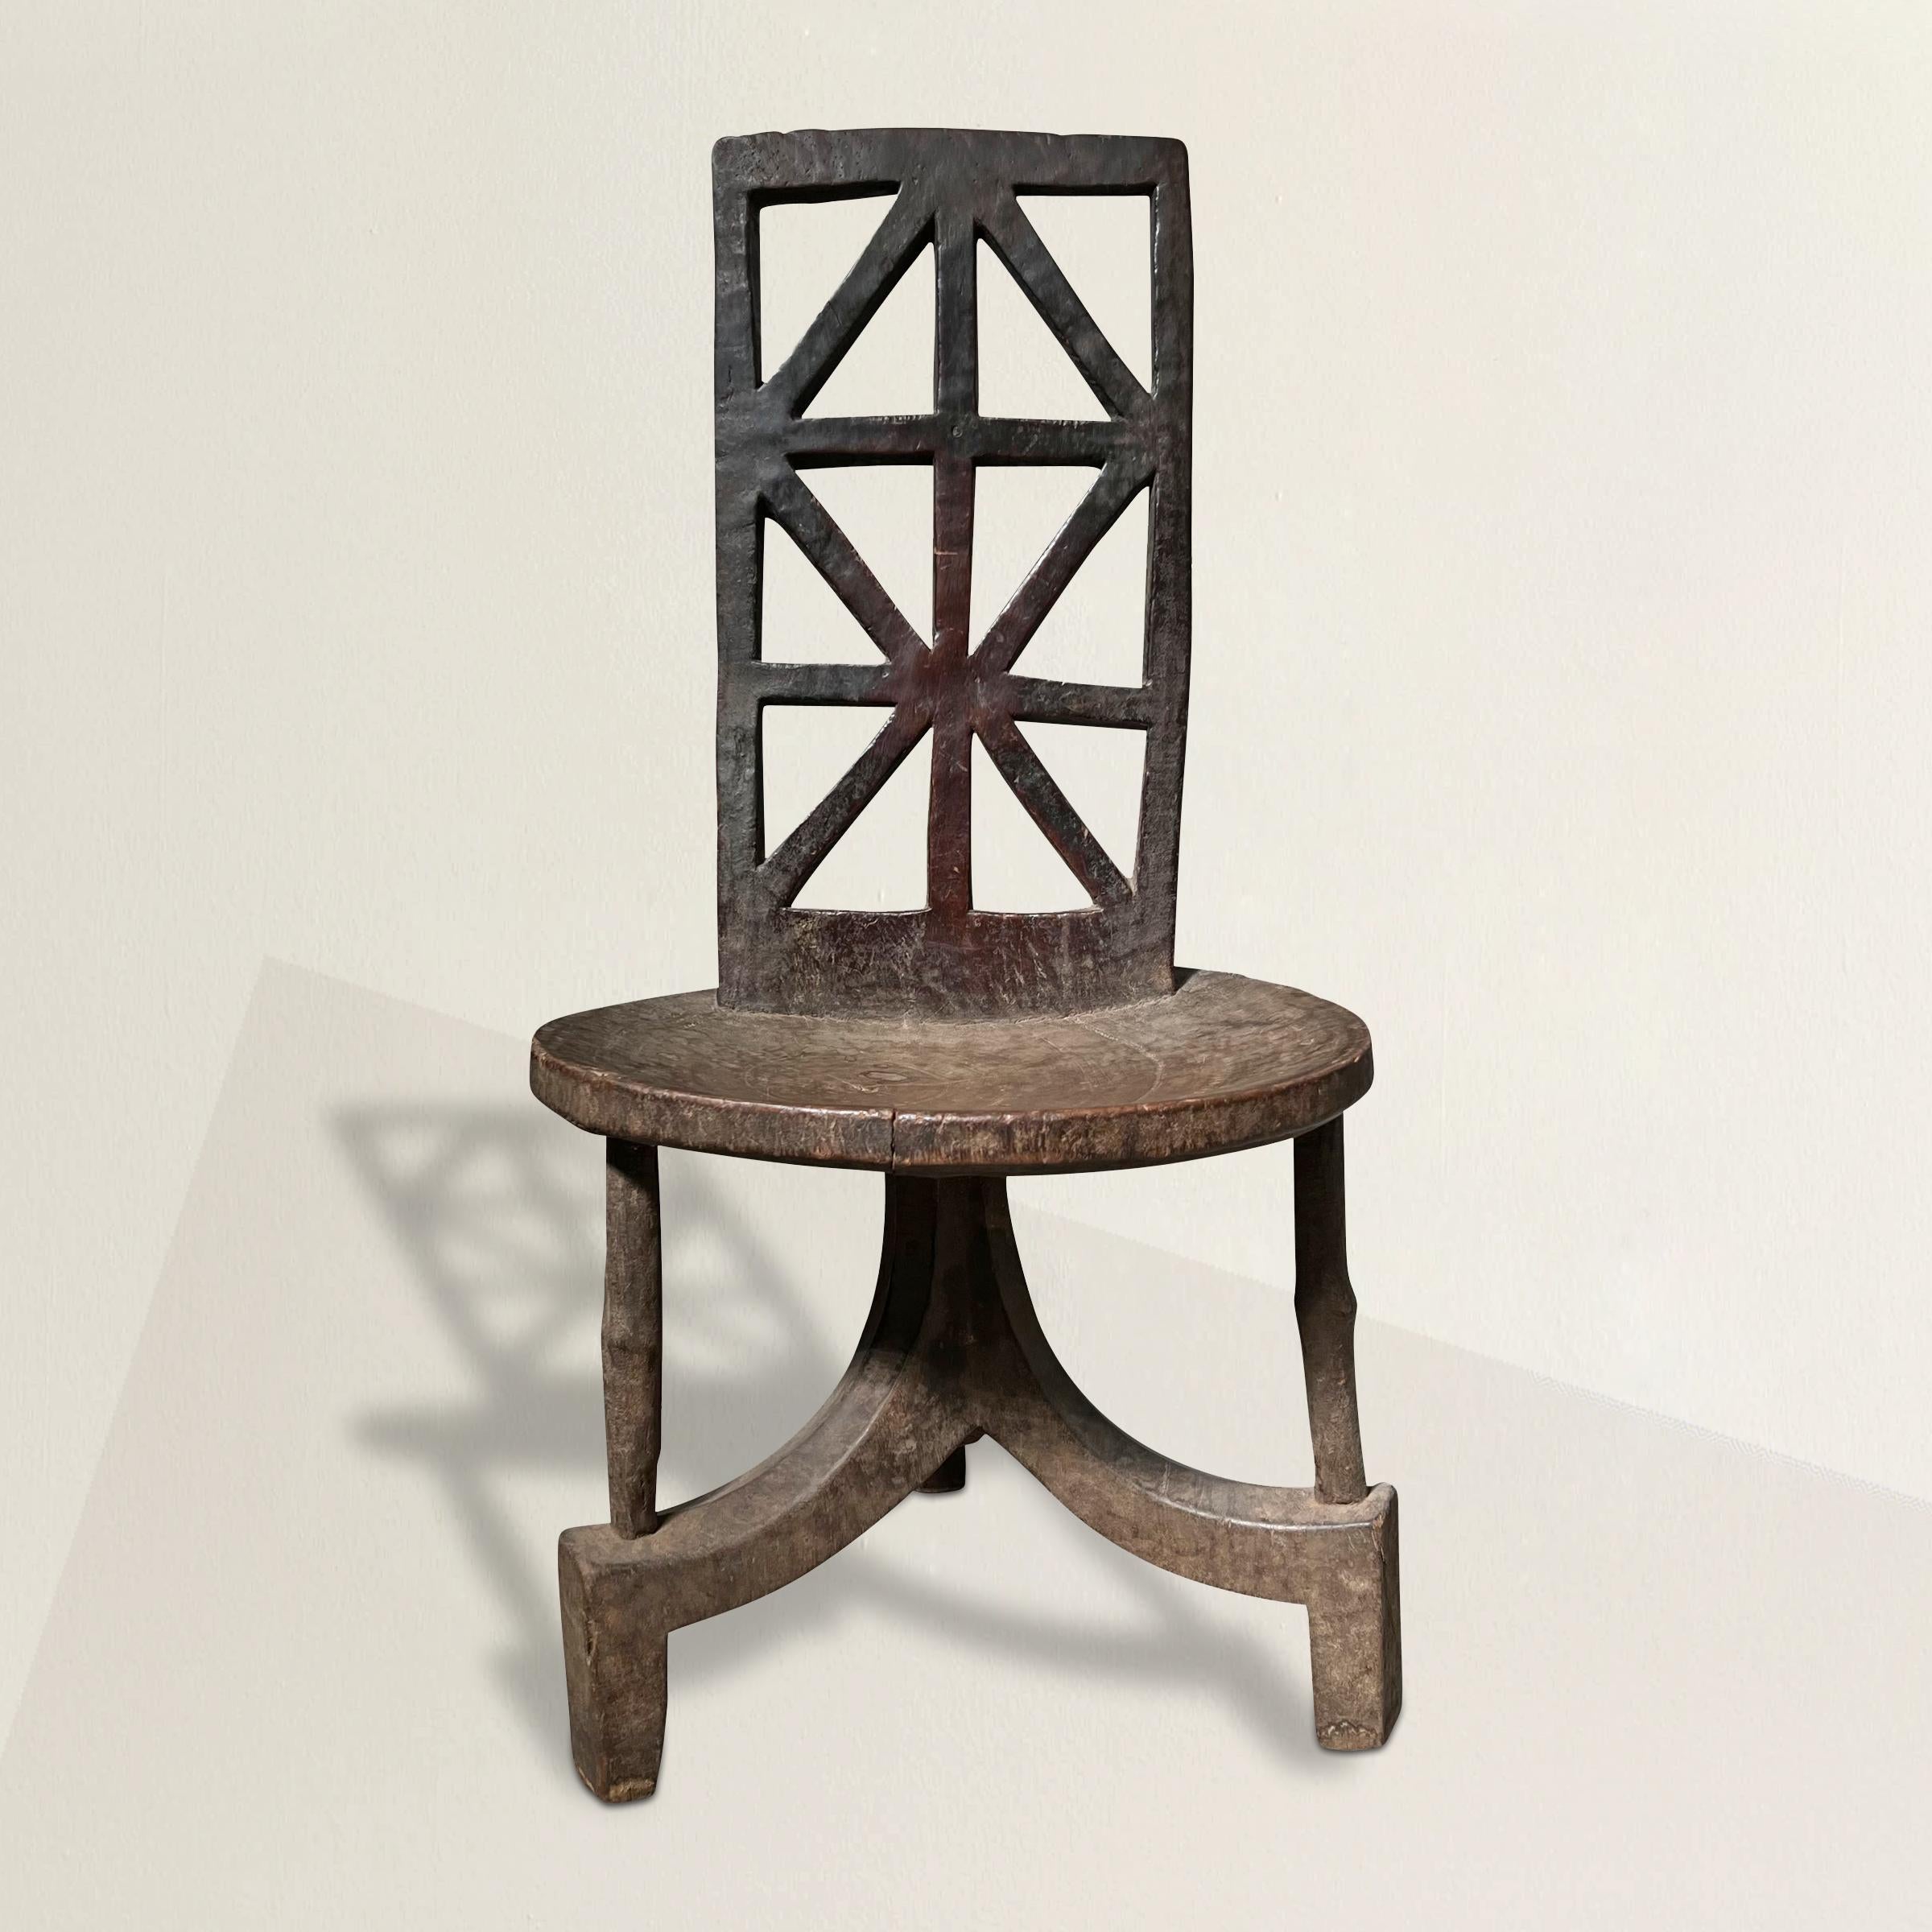 A remarkable and covetable example of a Jimma/Gurage People's Walga chair from the Omo River Region, Ethiopia. With its geometric patterned back support, round concave seat, and tripod legs, this chair has been carved from a single piece of wood and